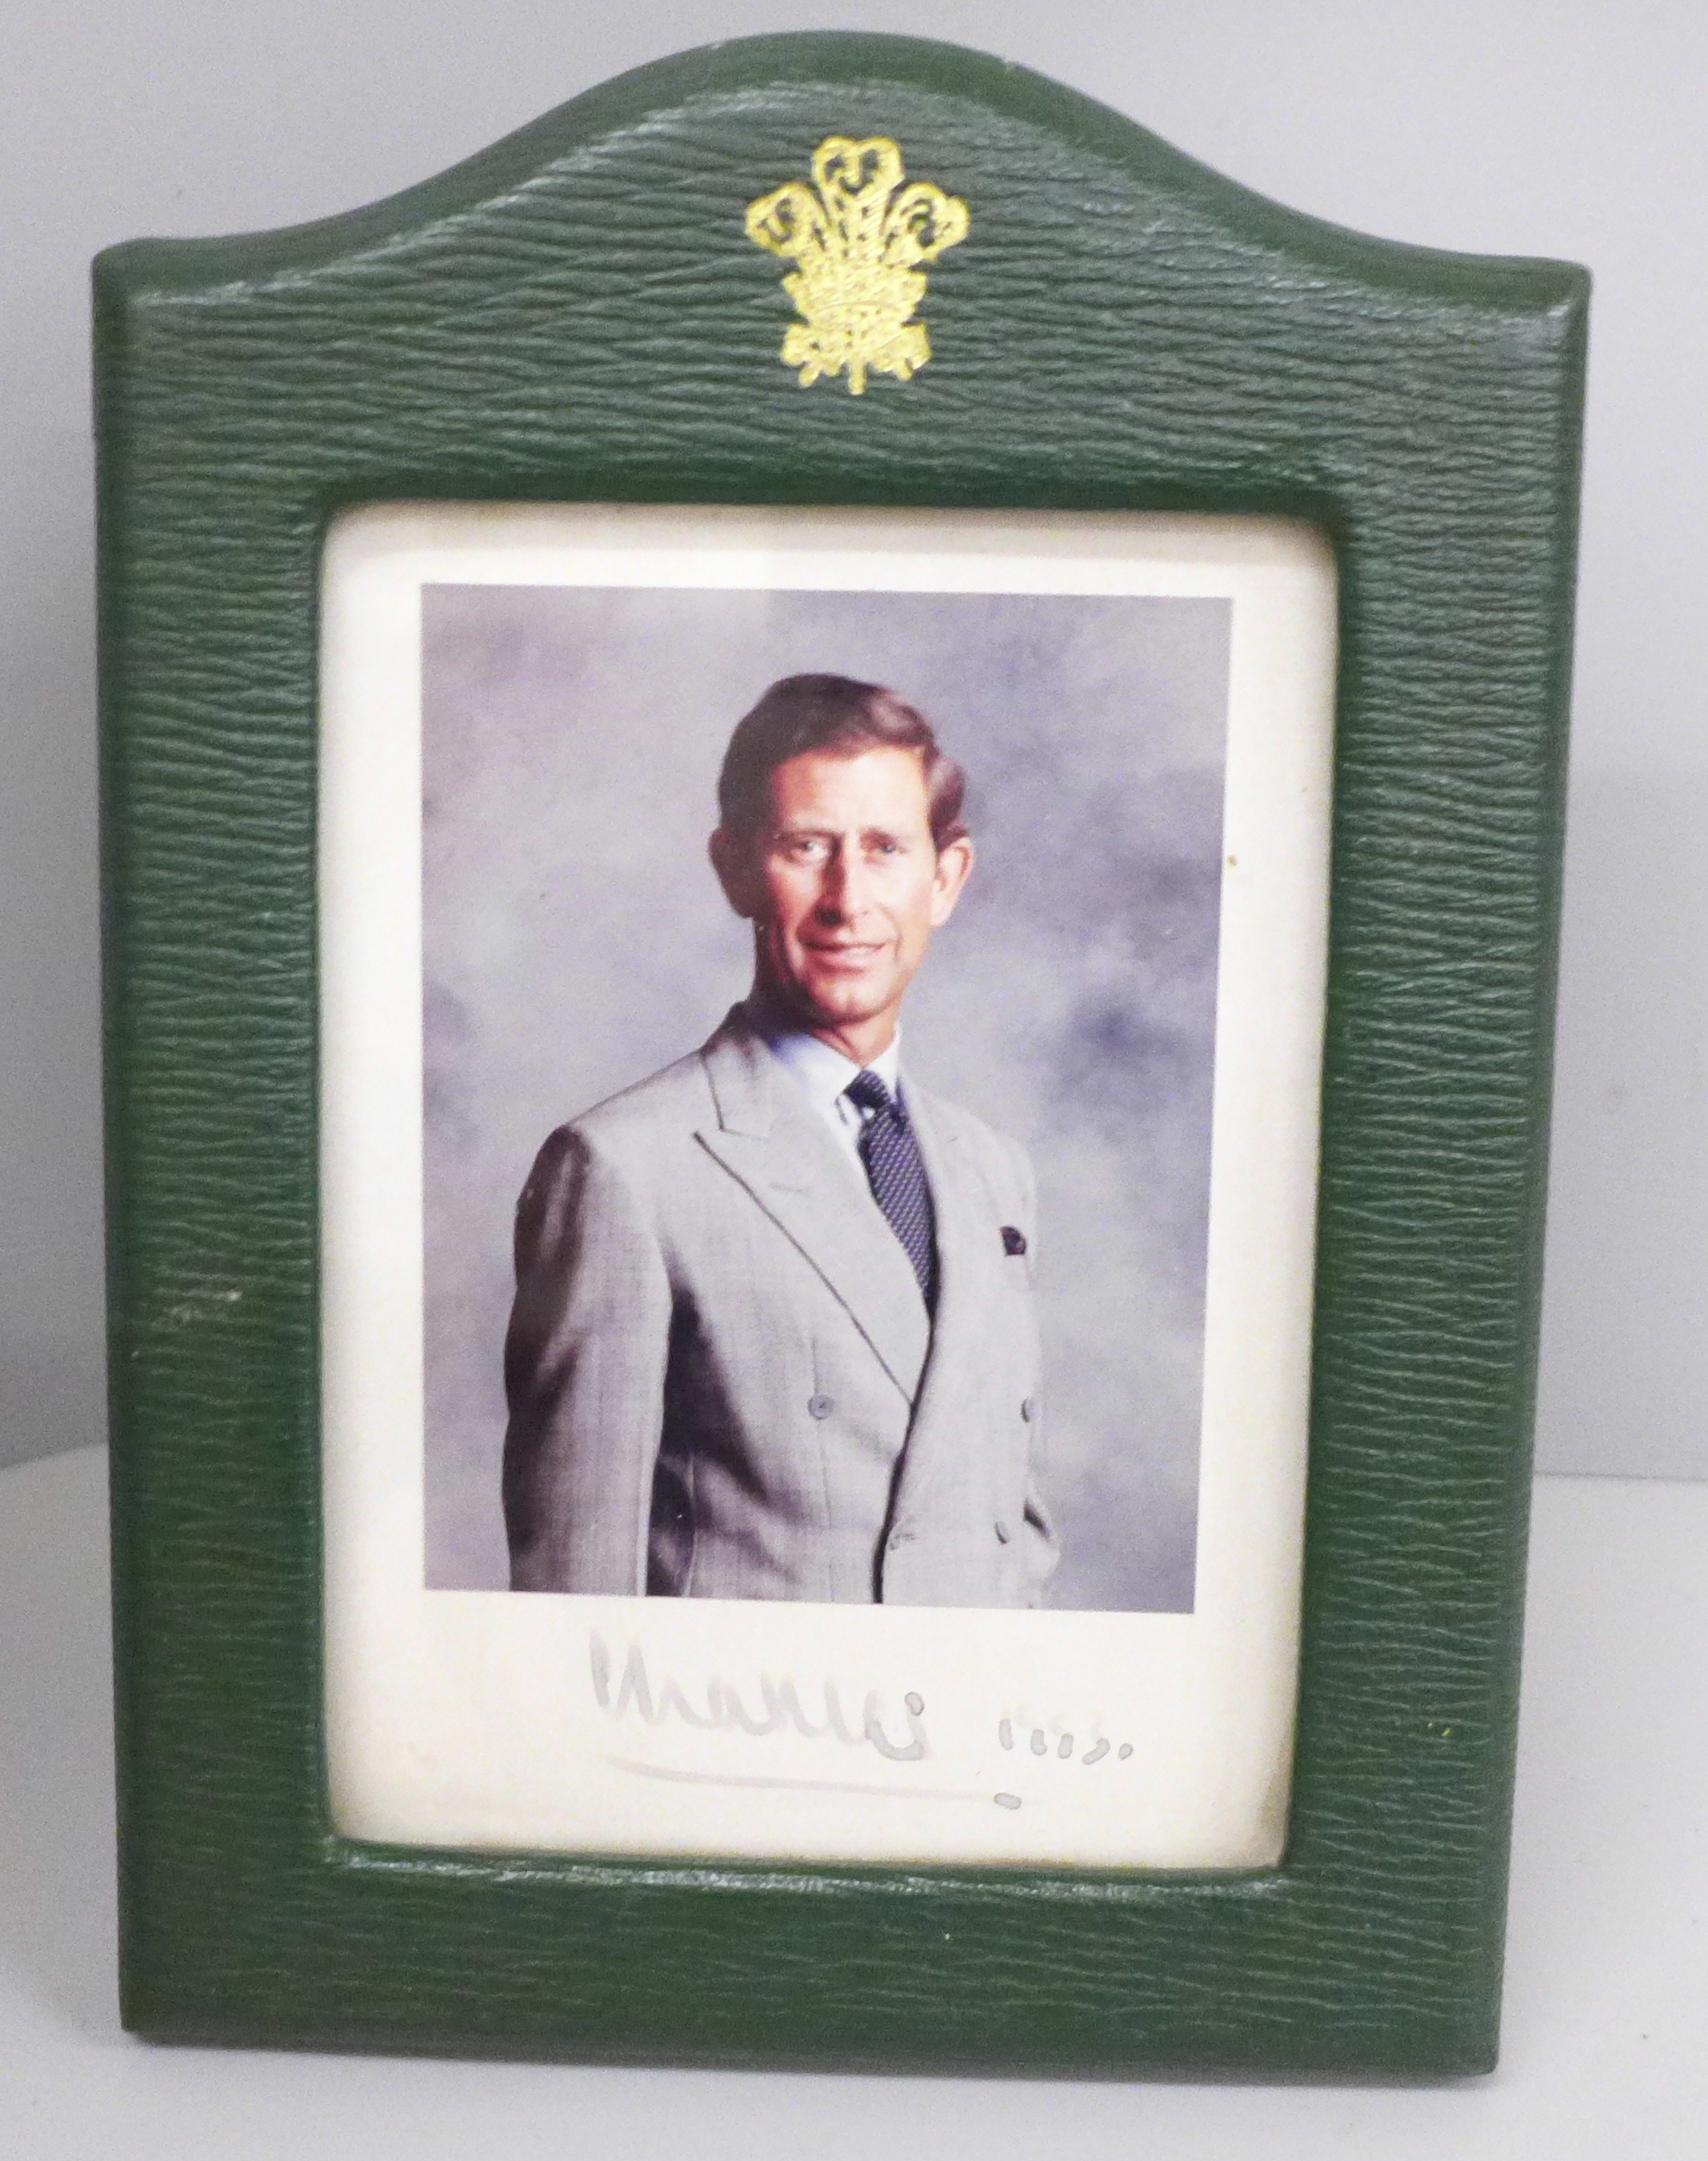 King Charles III, a coloured photograph signed in ink 'Charles 1993' presented in green Moroccan